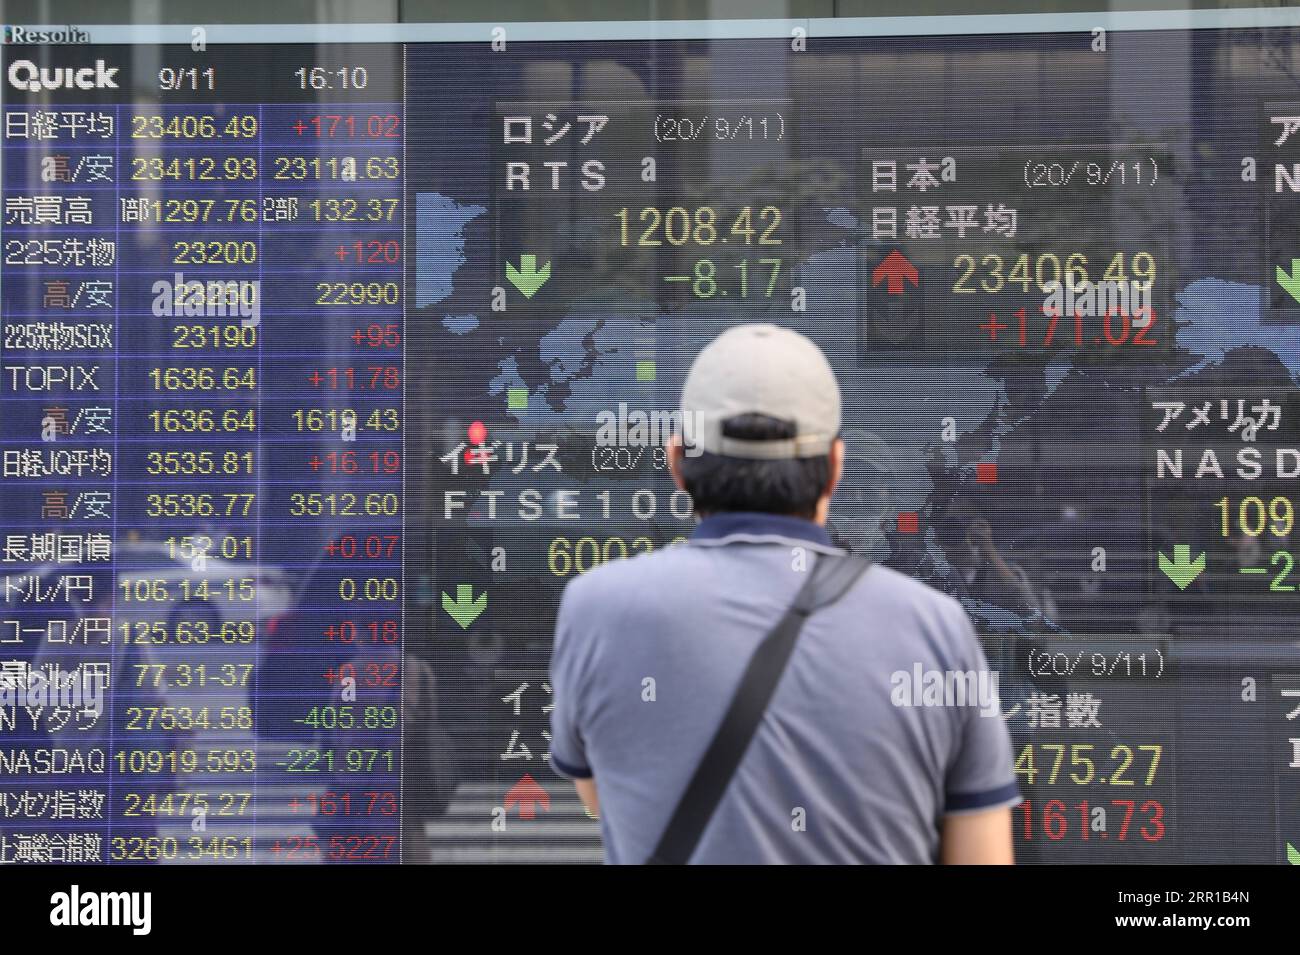 200911 -- TOKYO, Sept. 11, 2020 -- A man watches an electronic board showing the stock index in Tokyo, Japan, on Sept. 11, 2020. TO GO WITH Tokyo stocks close higher on weak yen despite U.S. tech rout overnight  JAPAN-TOKYO-STOCKS DuxXiaoyi PUBLICATIONxNOTxINxCHN Stock Photo